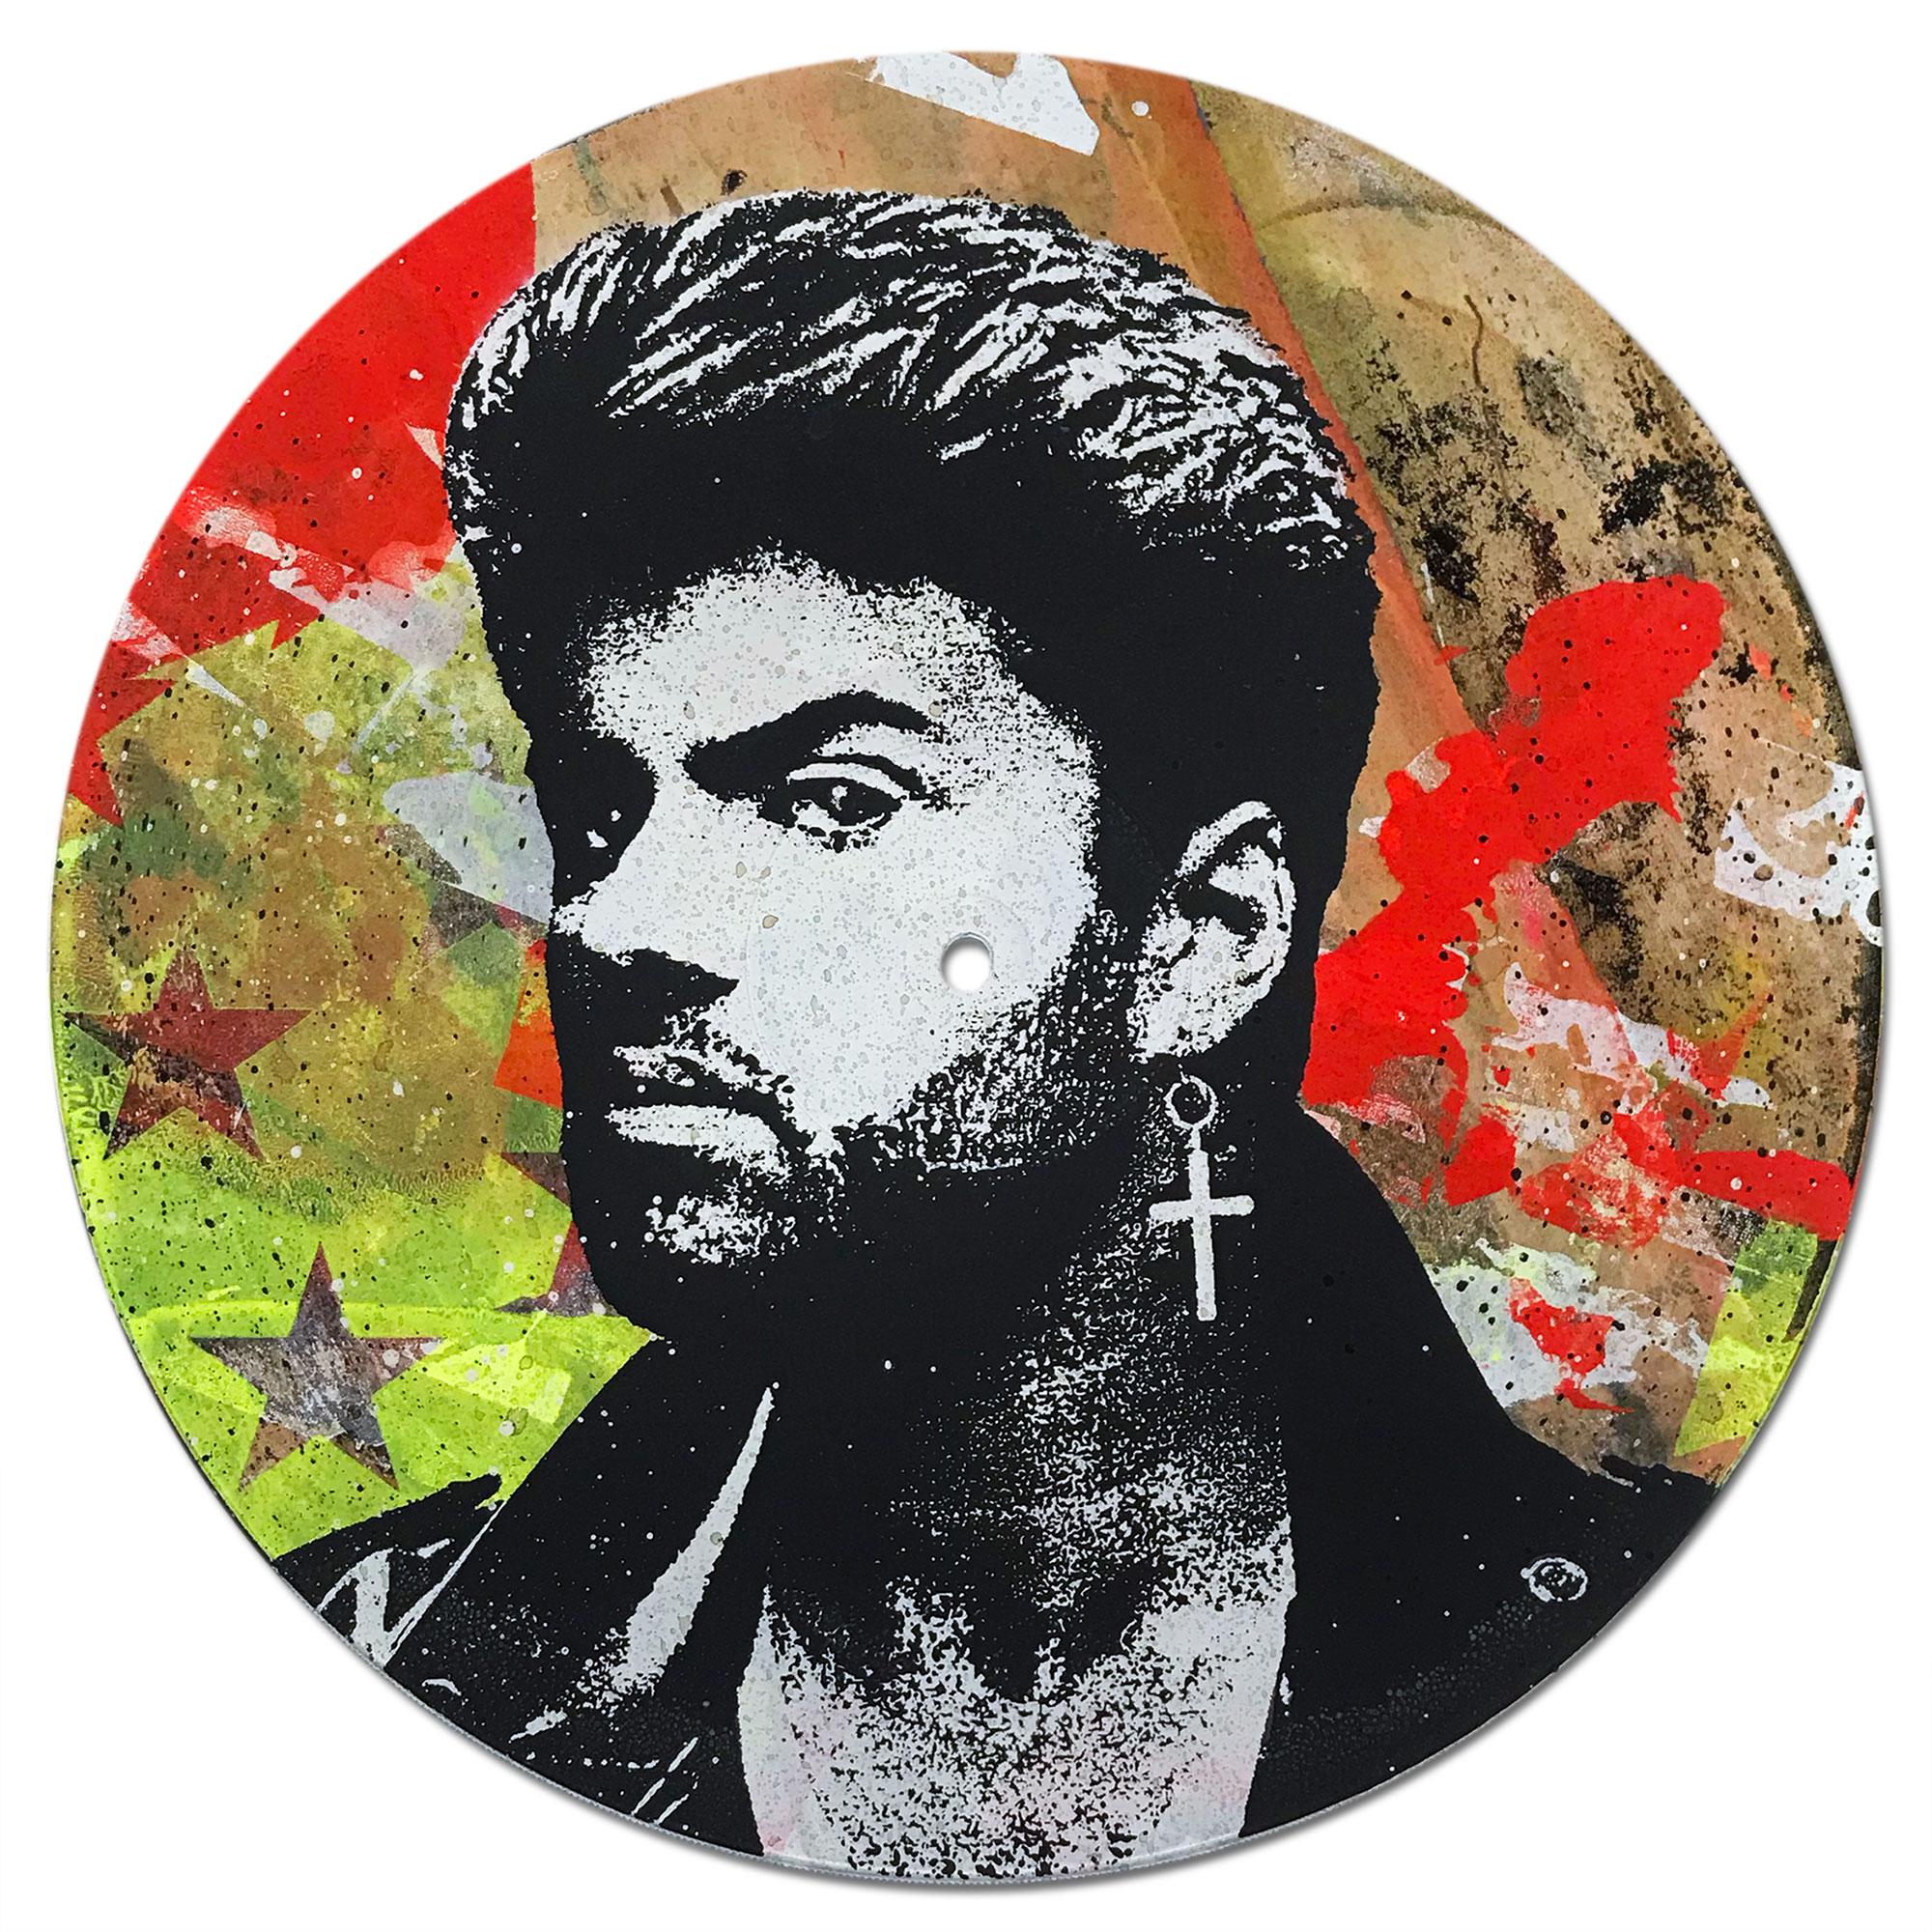 George Michael Vinyl 1-9 Greg Gossel Pop Art LP Record (Singles & Sets Available)

Available Editions: 1,3,5,6,7,8,9

These vinyl LP's were created for Greg Gossel's show 